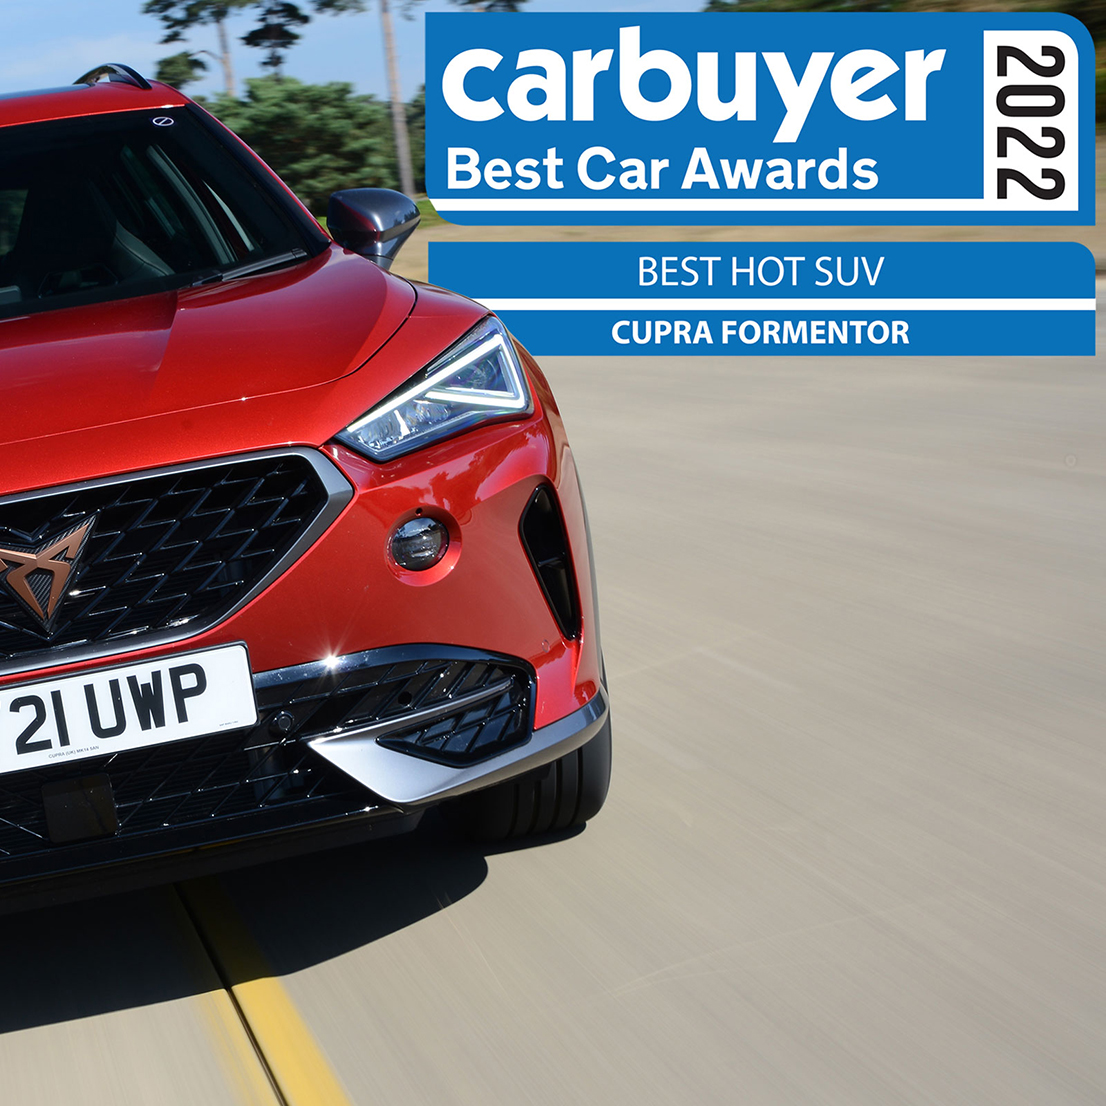 CUPRA Formentor - Best Hot SUV at Carbuyer Car of the Year Awards 2022